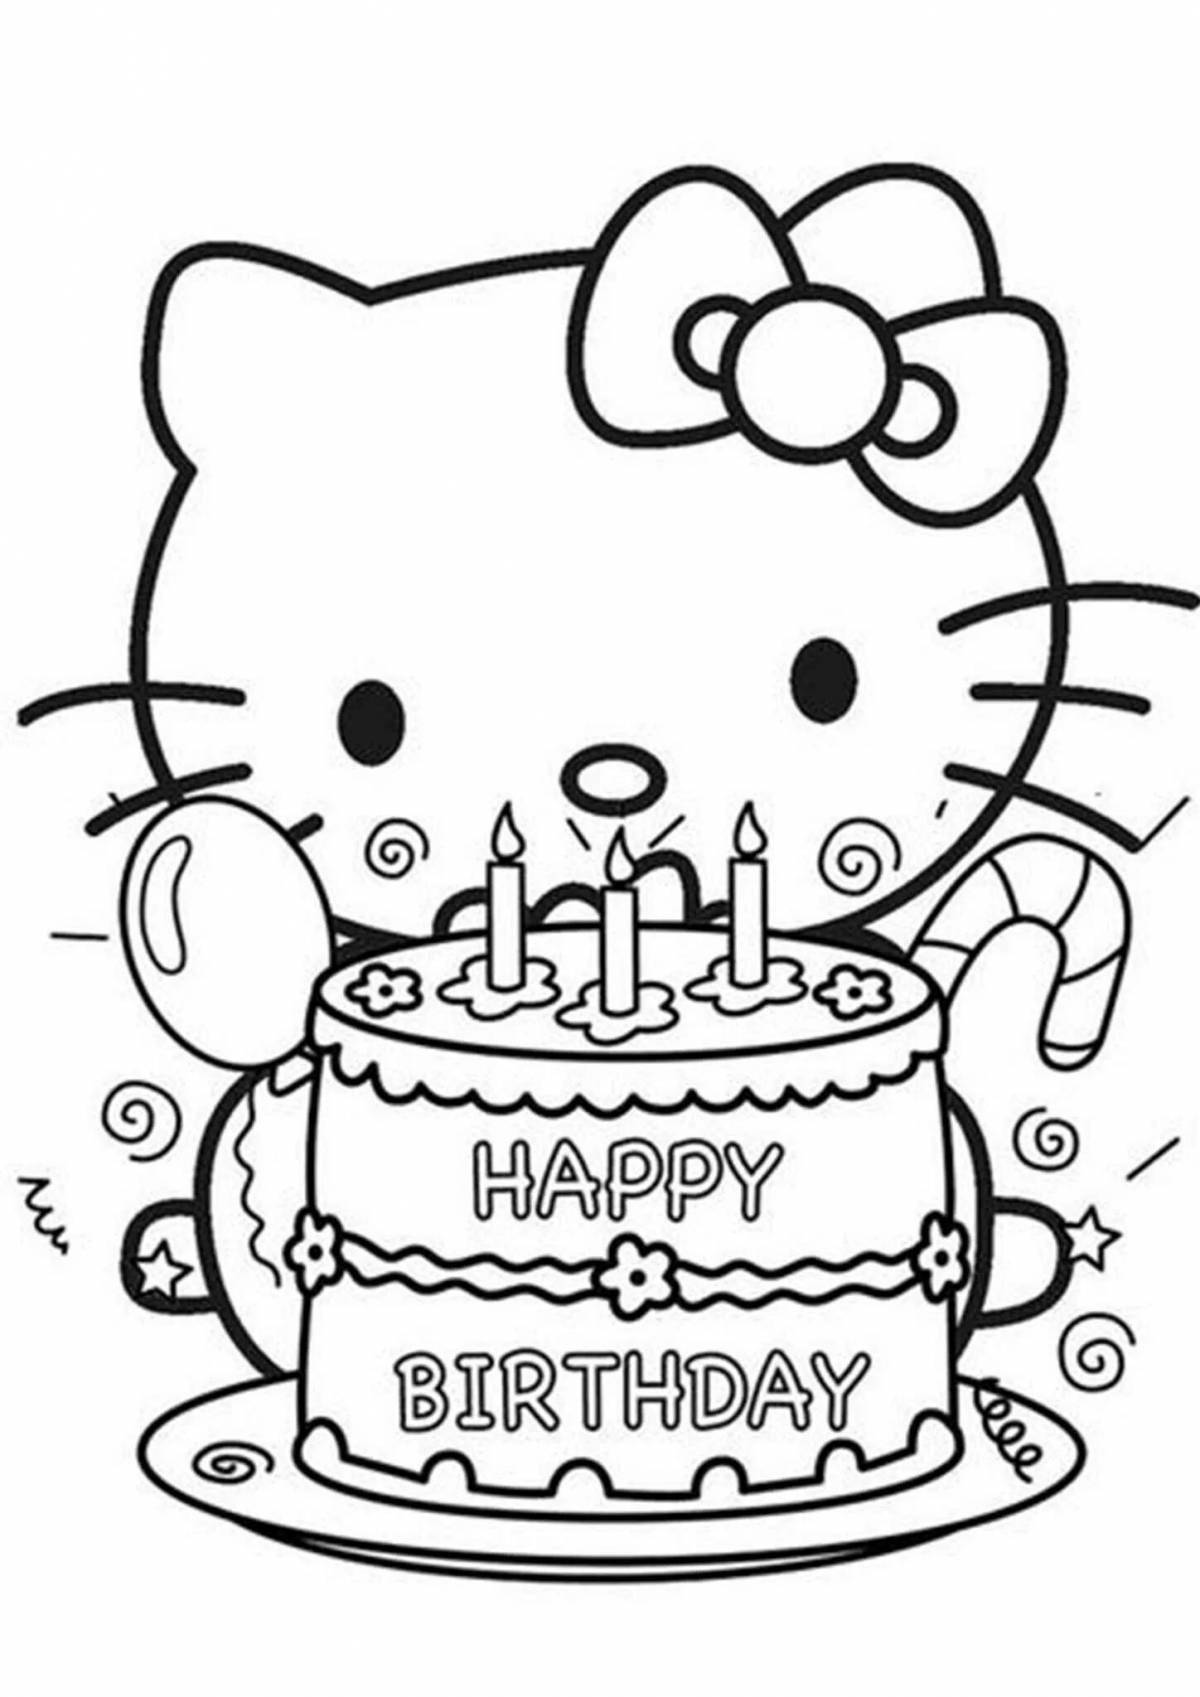 Happy godmother birthday coloring page